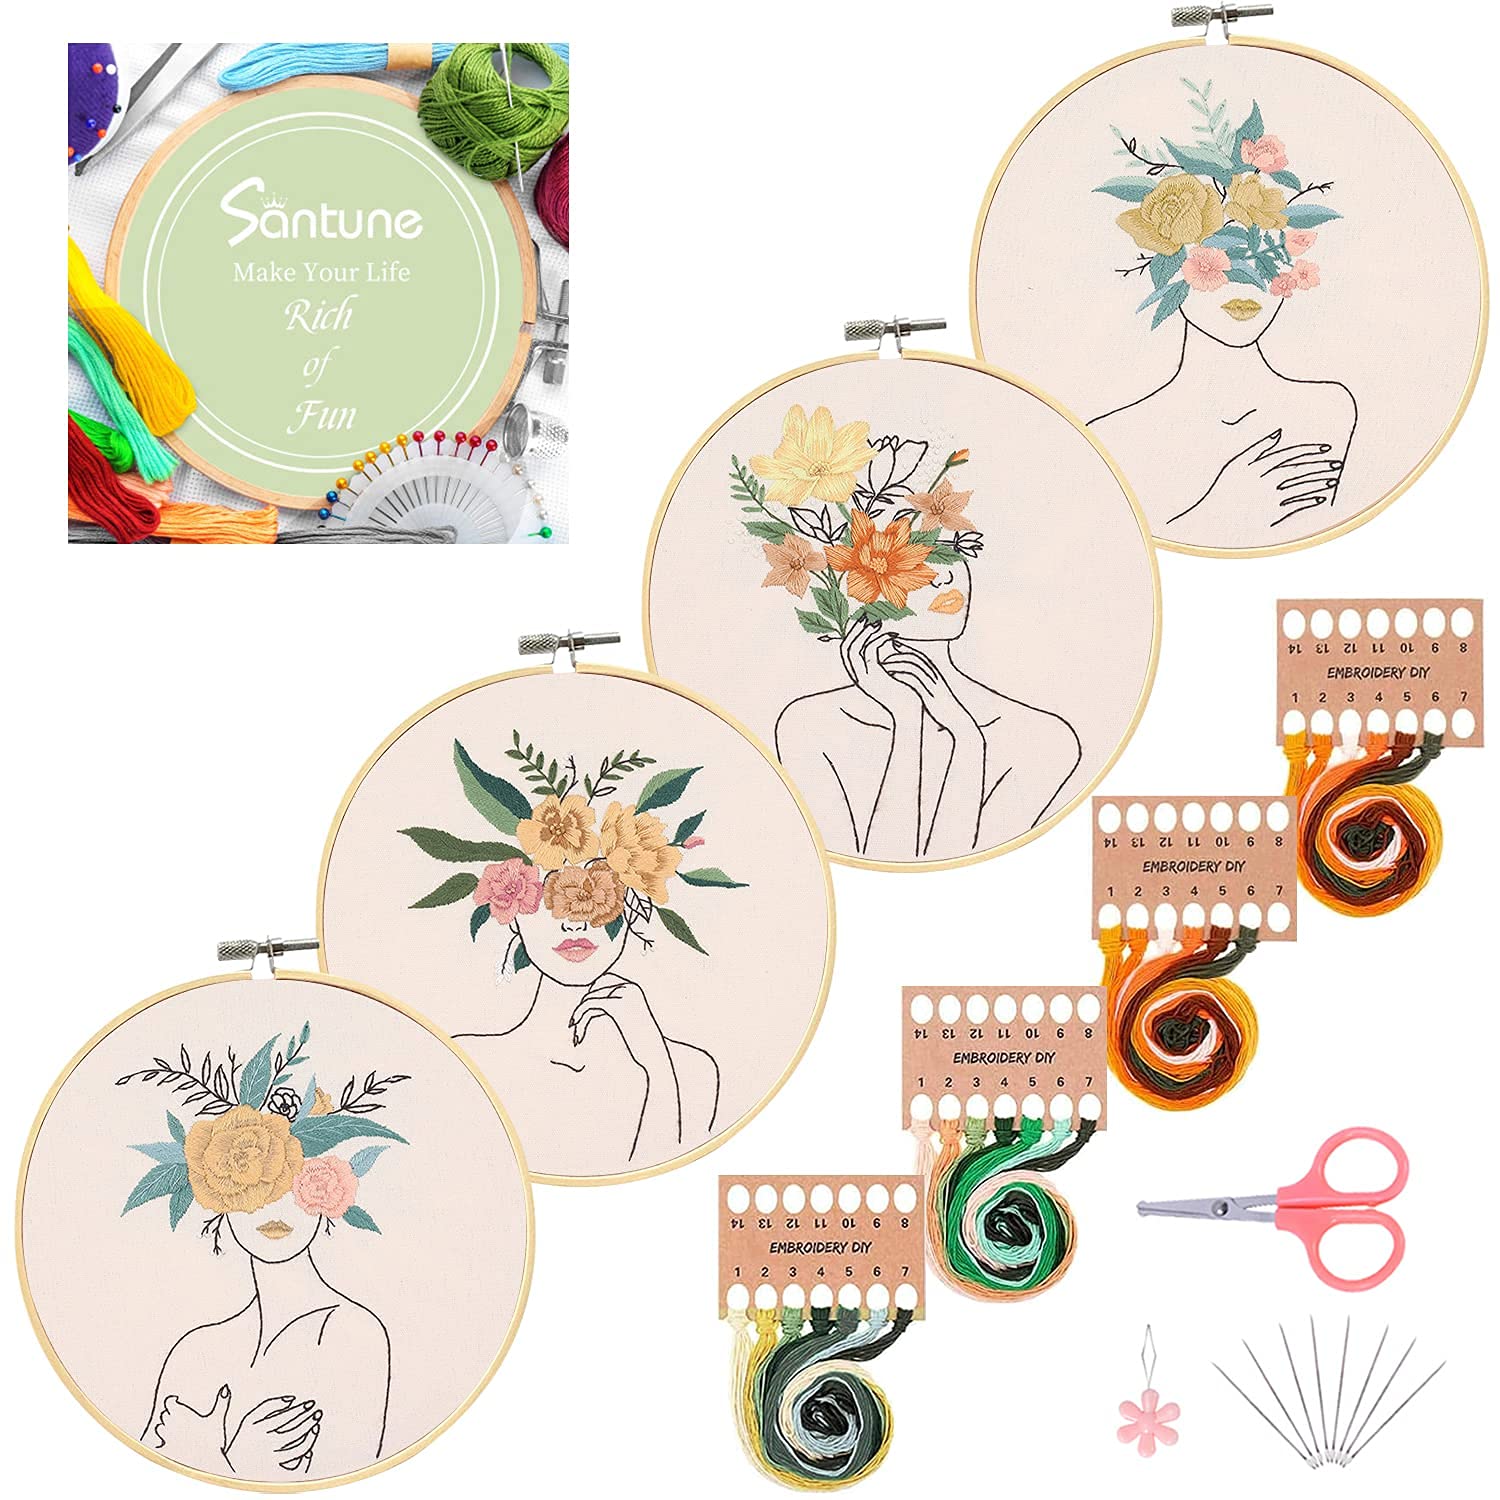 3pcs Embroidery Kits for Beginners,Include Embroidery Clothes with Pattern,3pcs  Embroidery Hoops and Instructions, Scissors,Flowers Plant Cross Stitch Set  for Adults DIY Decor Living Room 